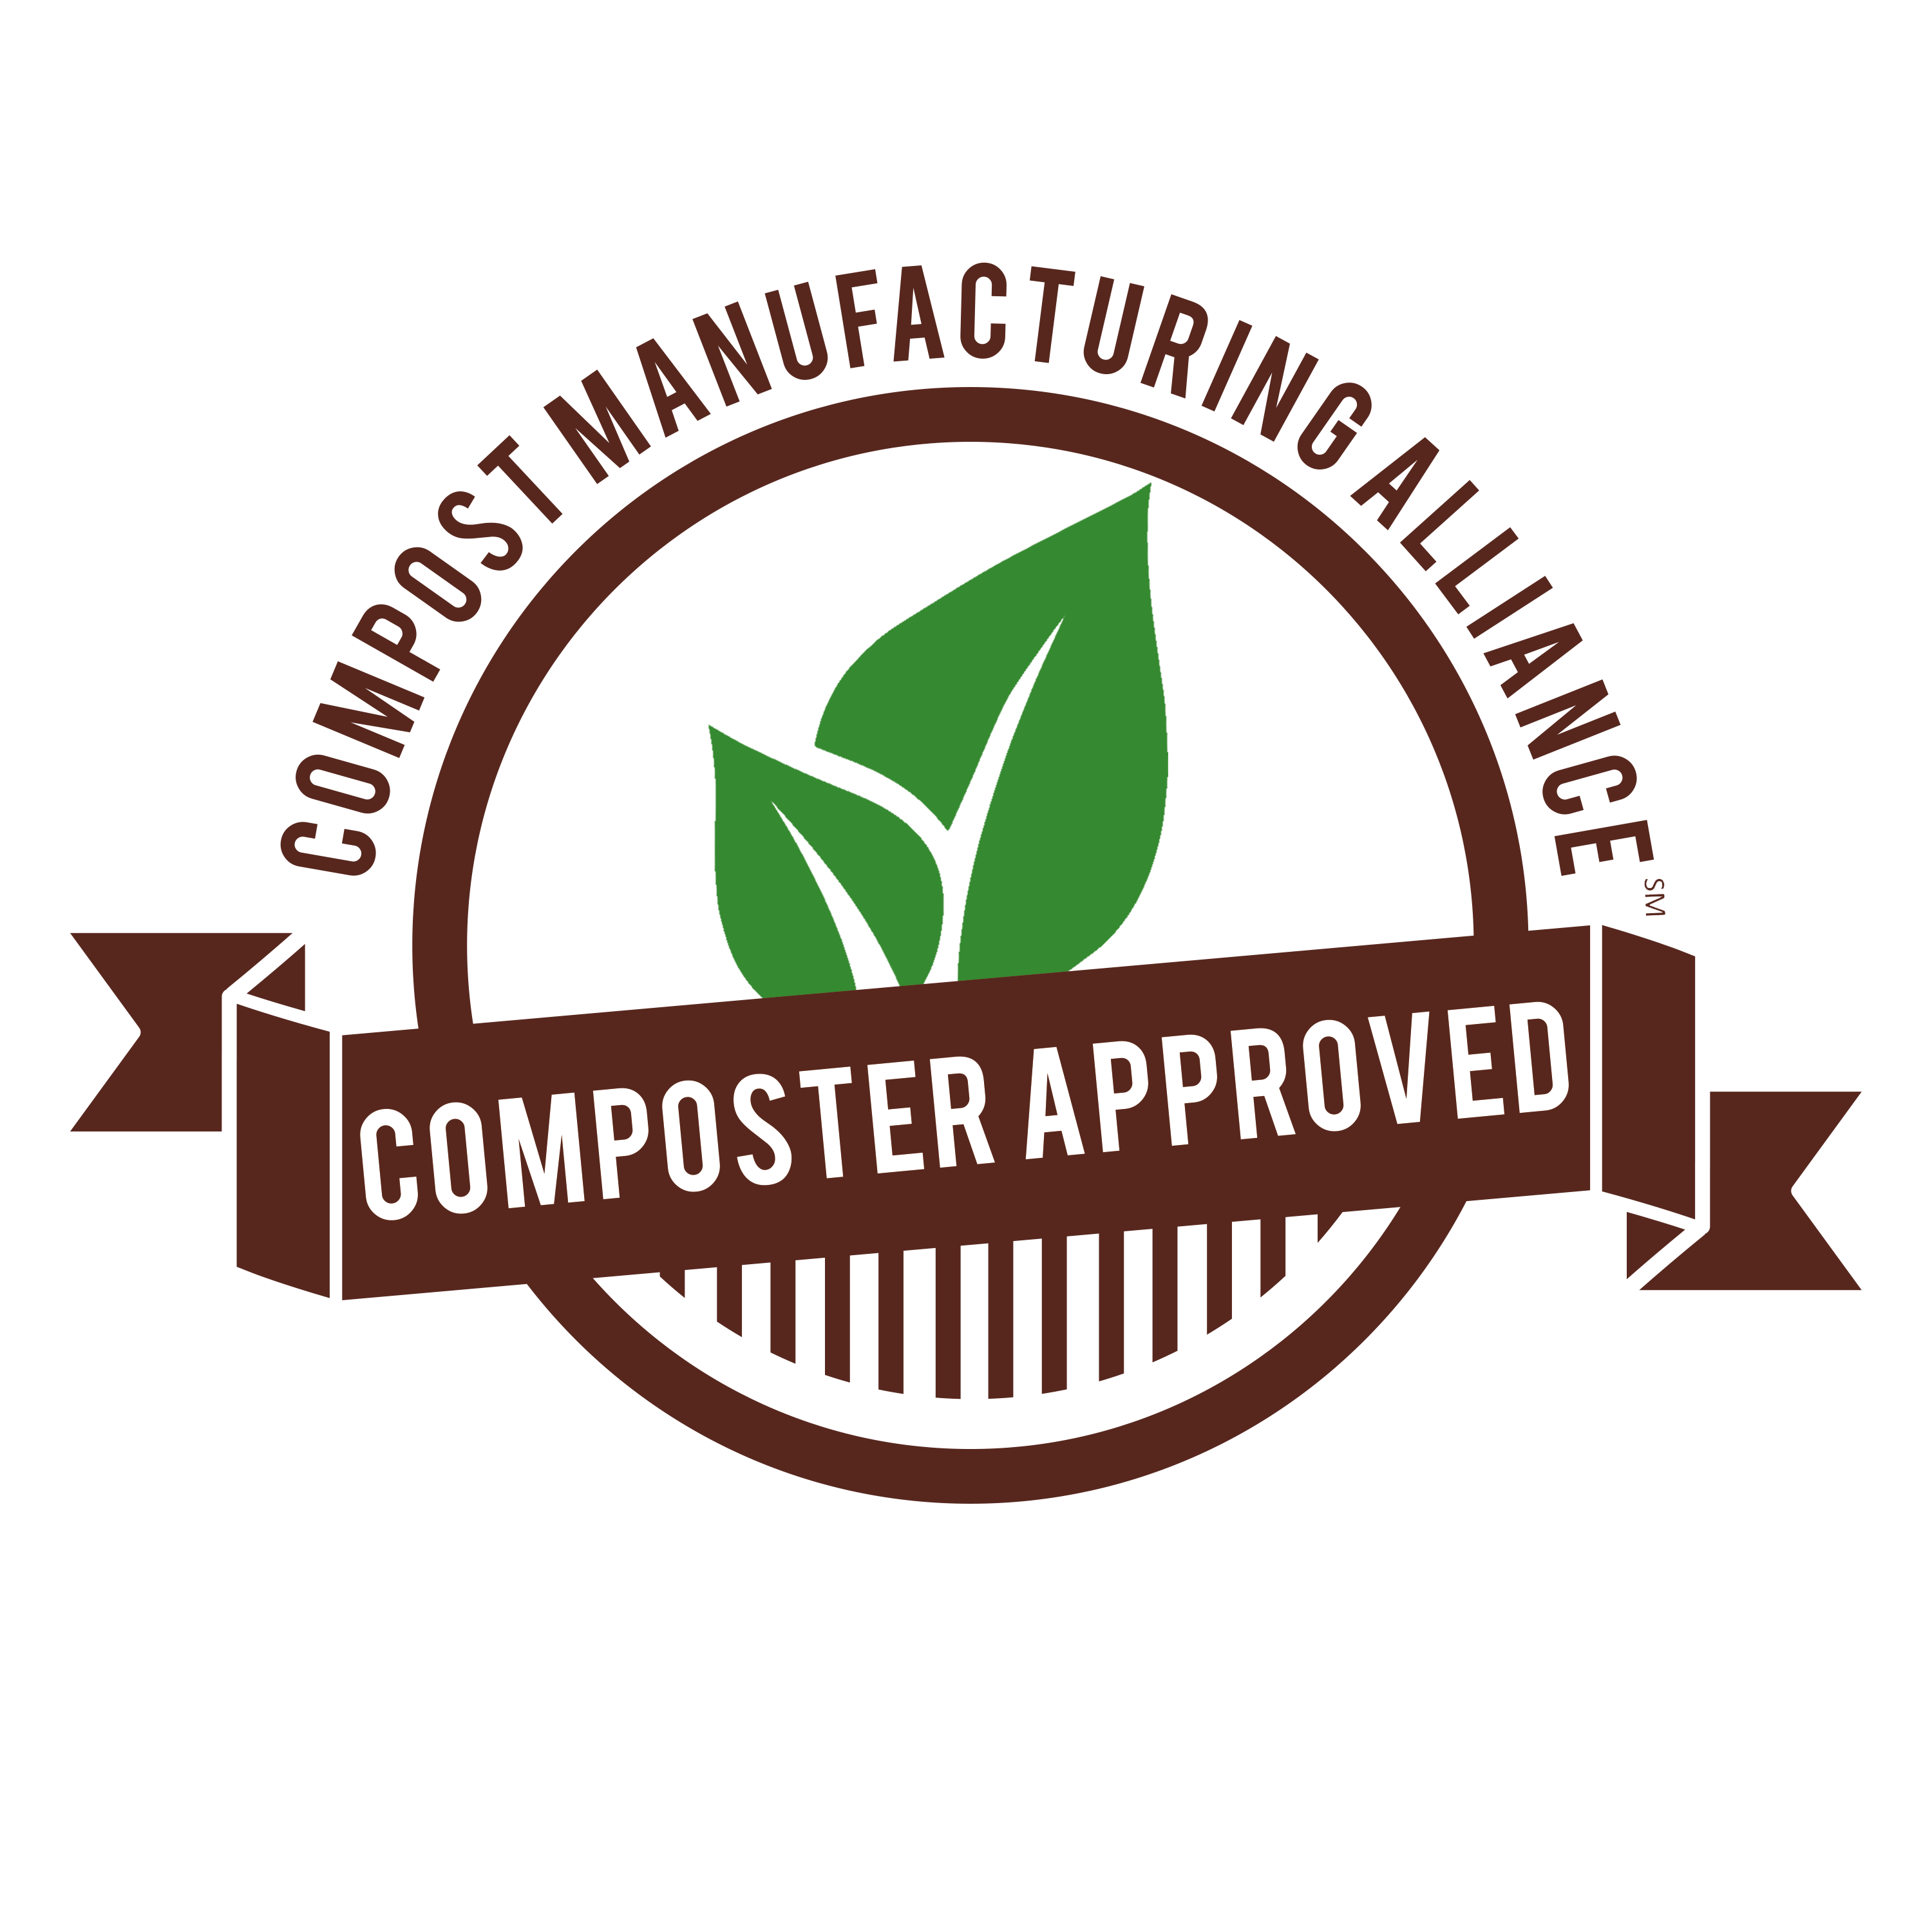 Compost Logo - Compost Manufacturing Alliance